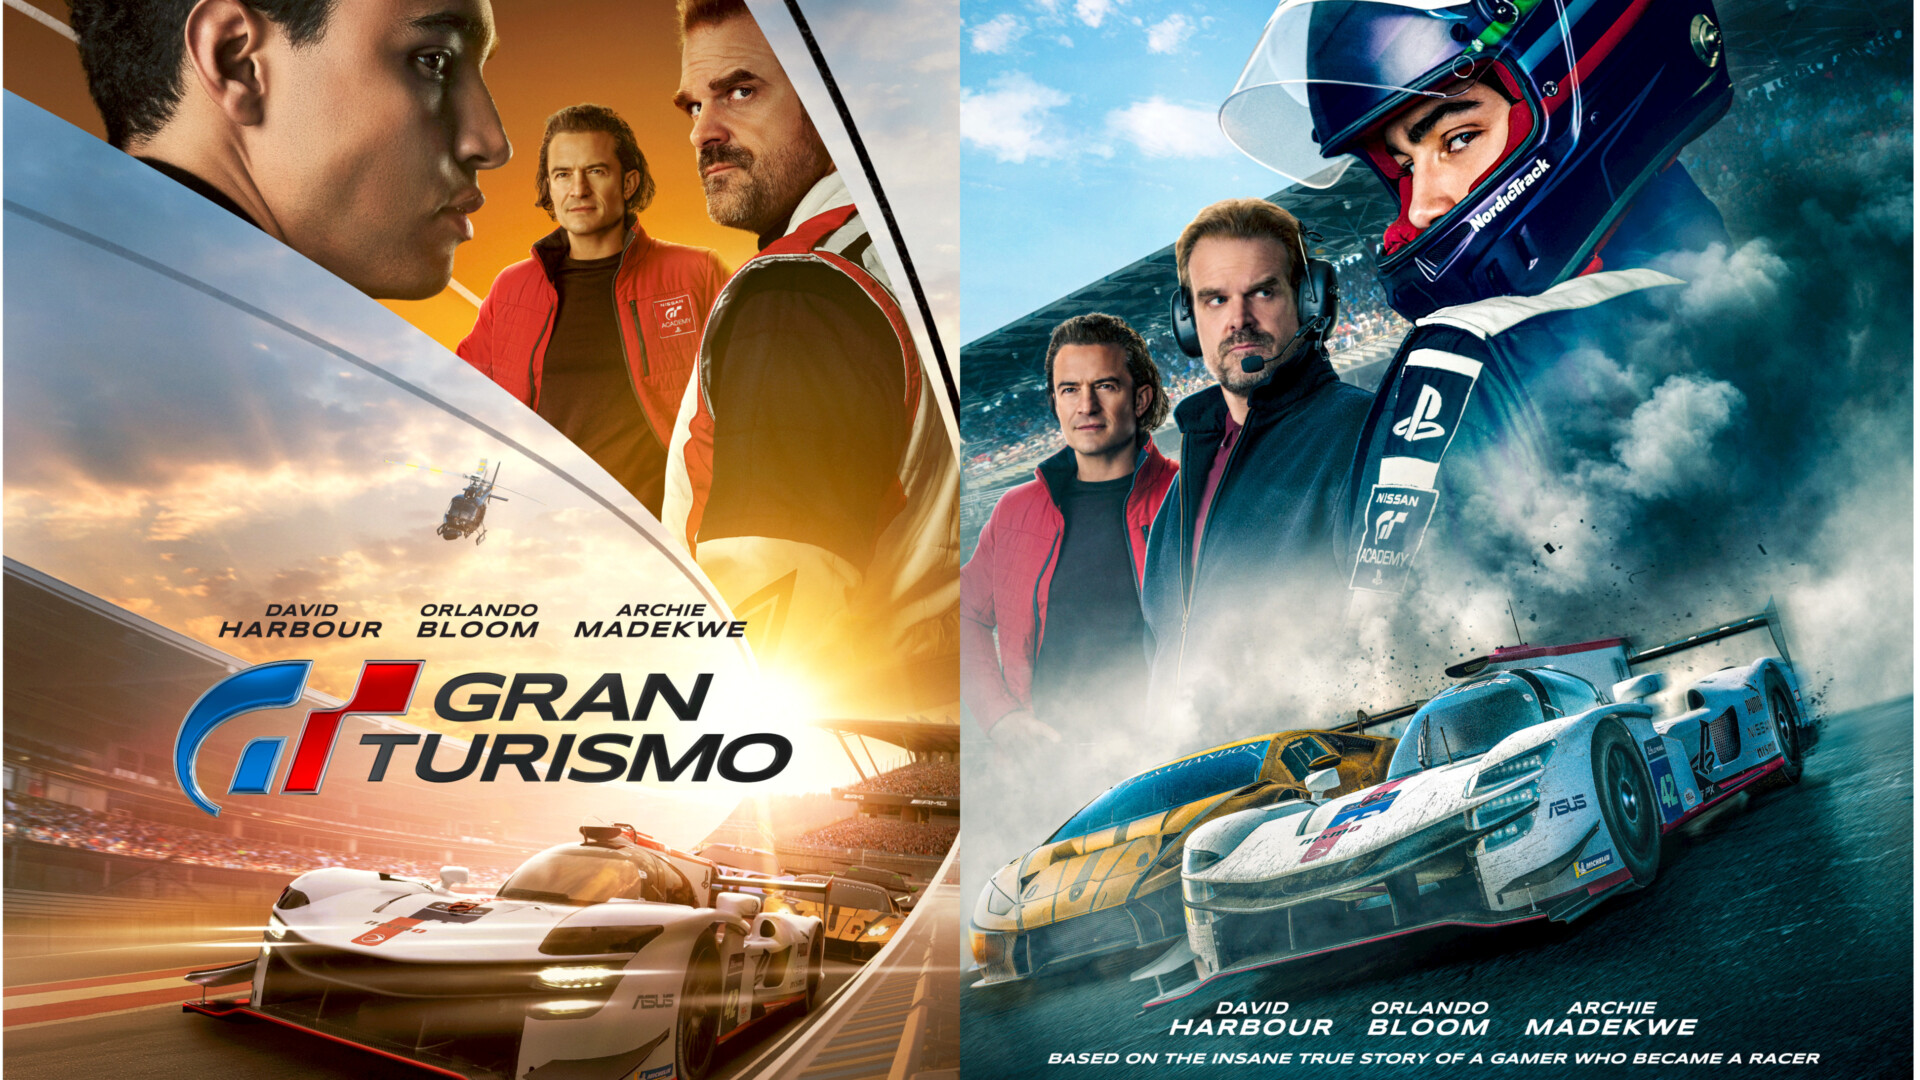 Contest: Win Some Cool “Gran Turismo: Based On A True Story” Merchandise & Movie Tickets